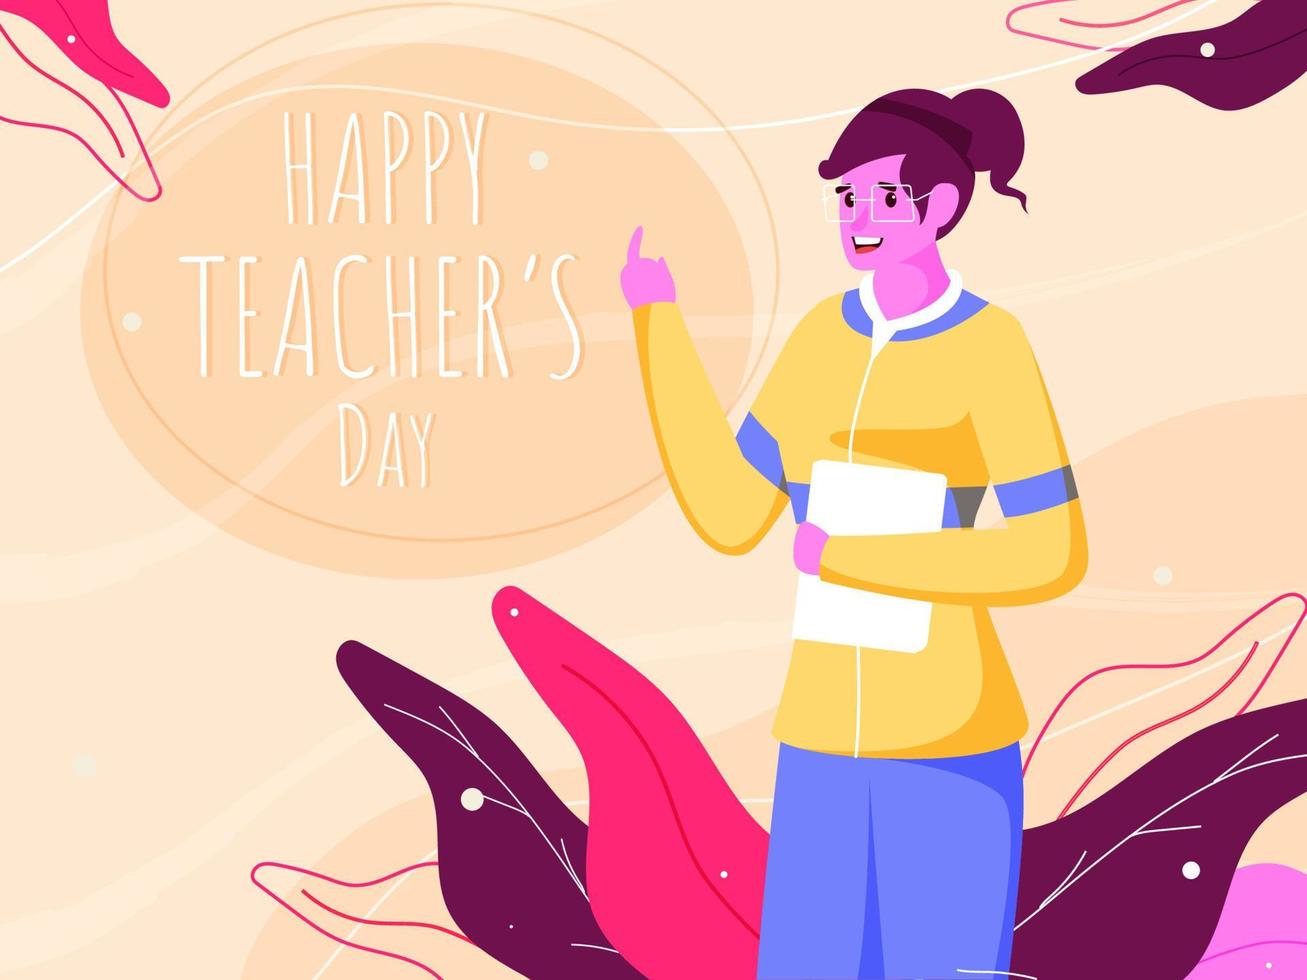 Cheerful Young Woman Teacher Showing Finger Point and Leaves on Pastel Peach Background for Happy Teacher's Day Celebration. vector